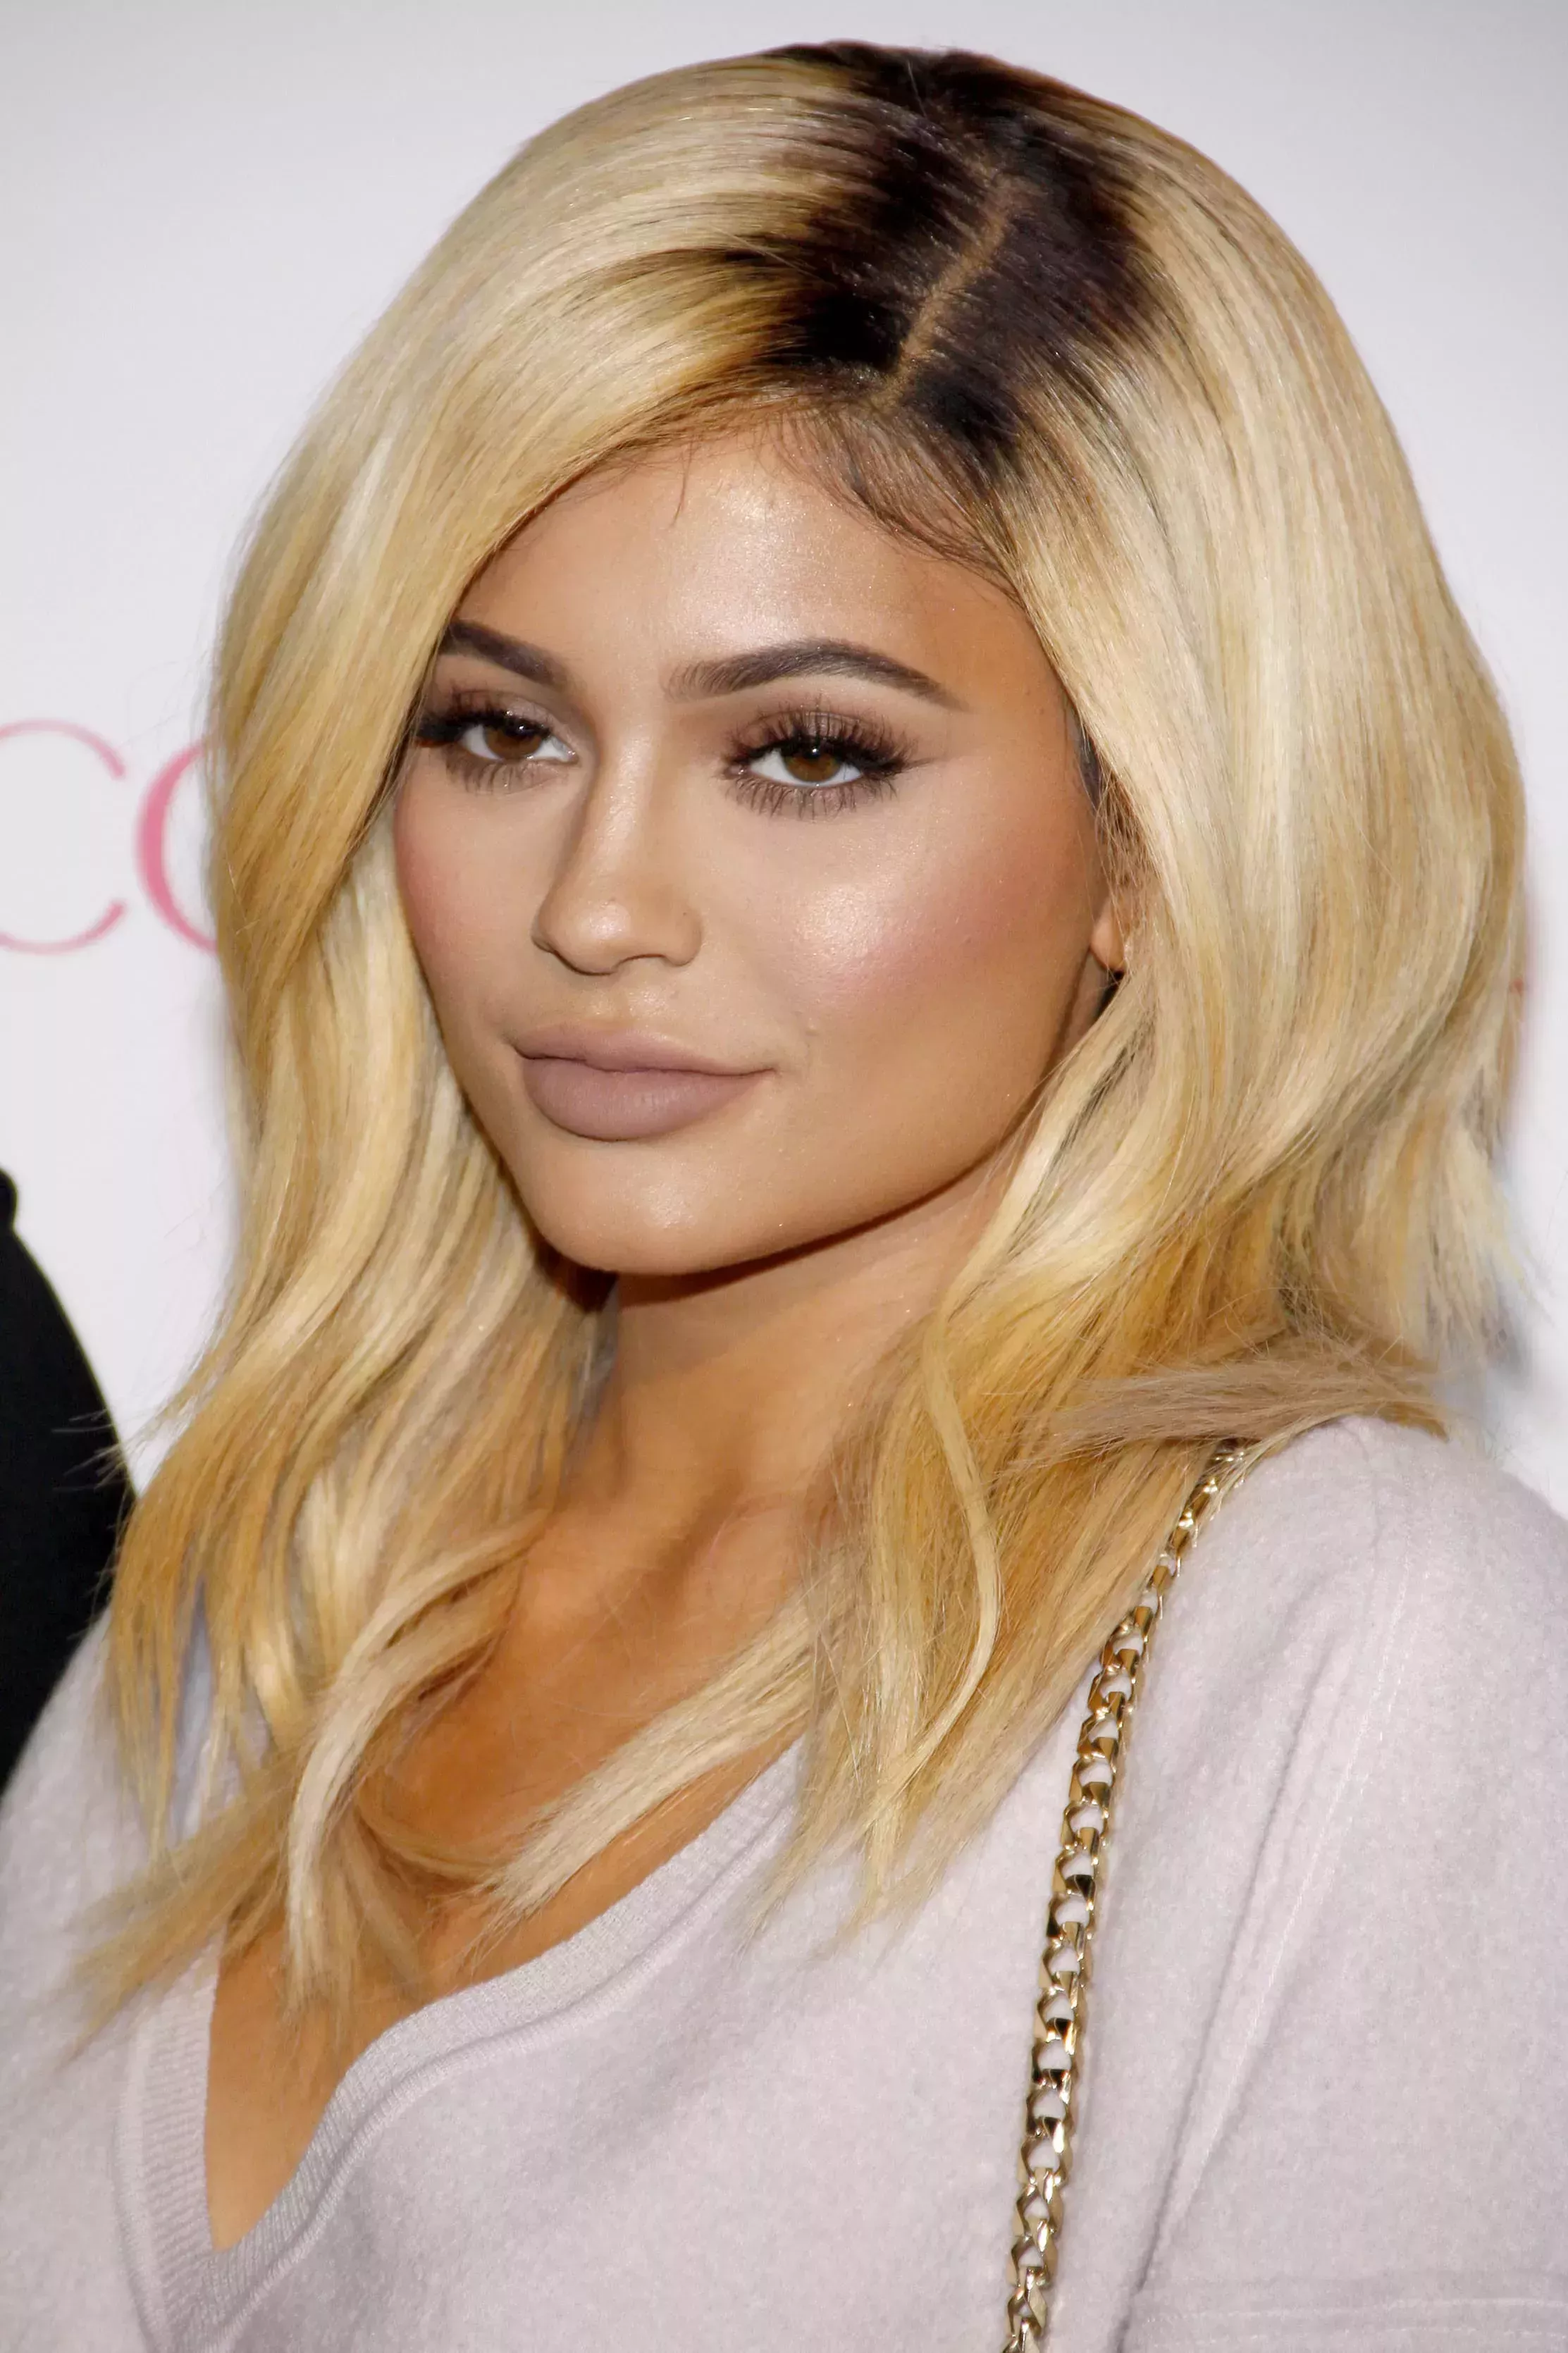 Kylie Jenner’s Barbie Blonde with Dark Roots